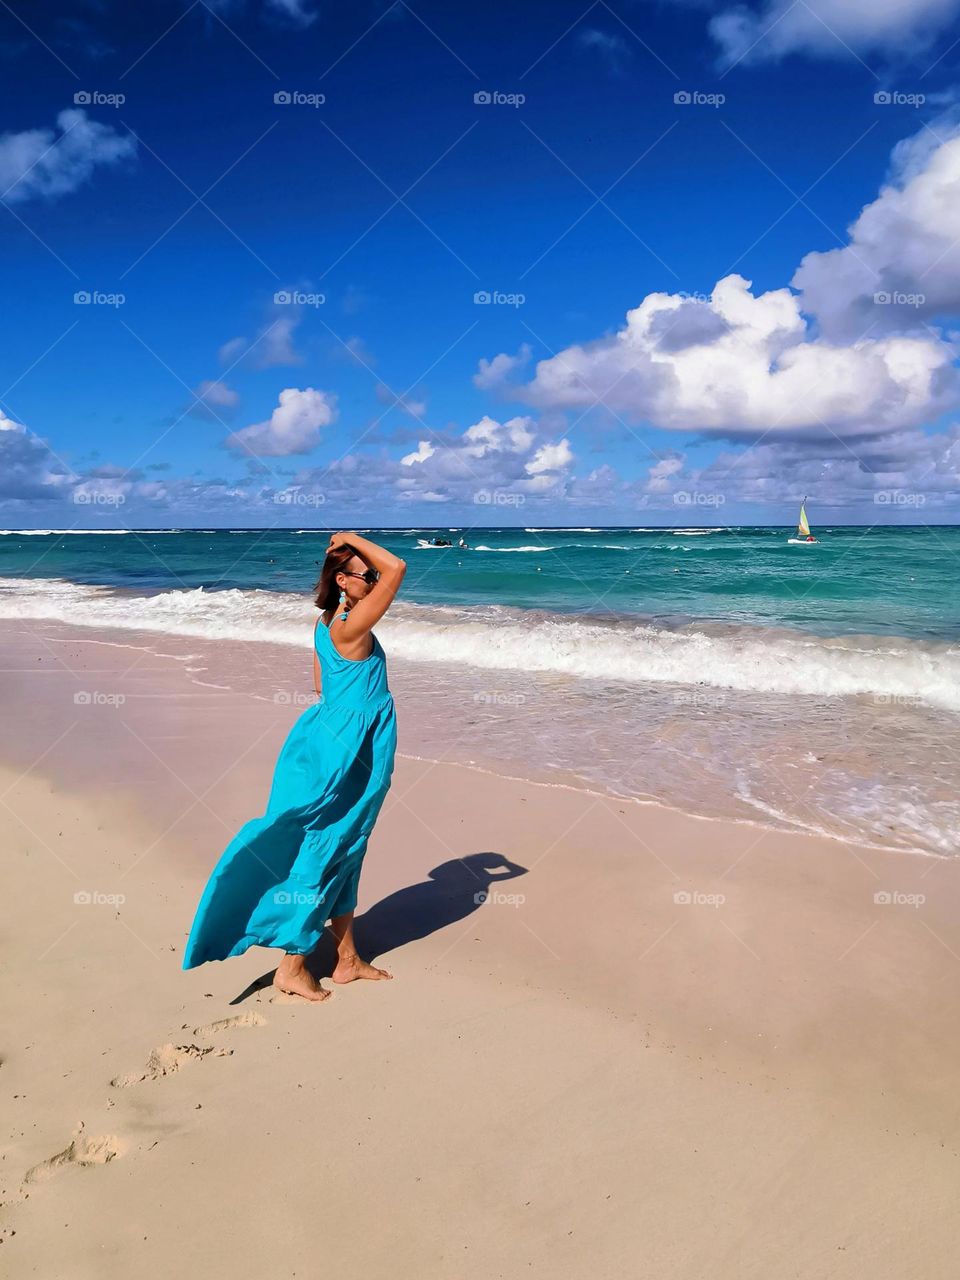 The sea is the best healer and antidepressant. The girl on the seashore enjoys the rest and the beauty of nature. Beautiful memories, and nice moments. Blue dress, blue sea, blue sky. Dominican Republic - paradise place to rest and relax in holiday.